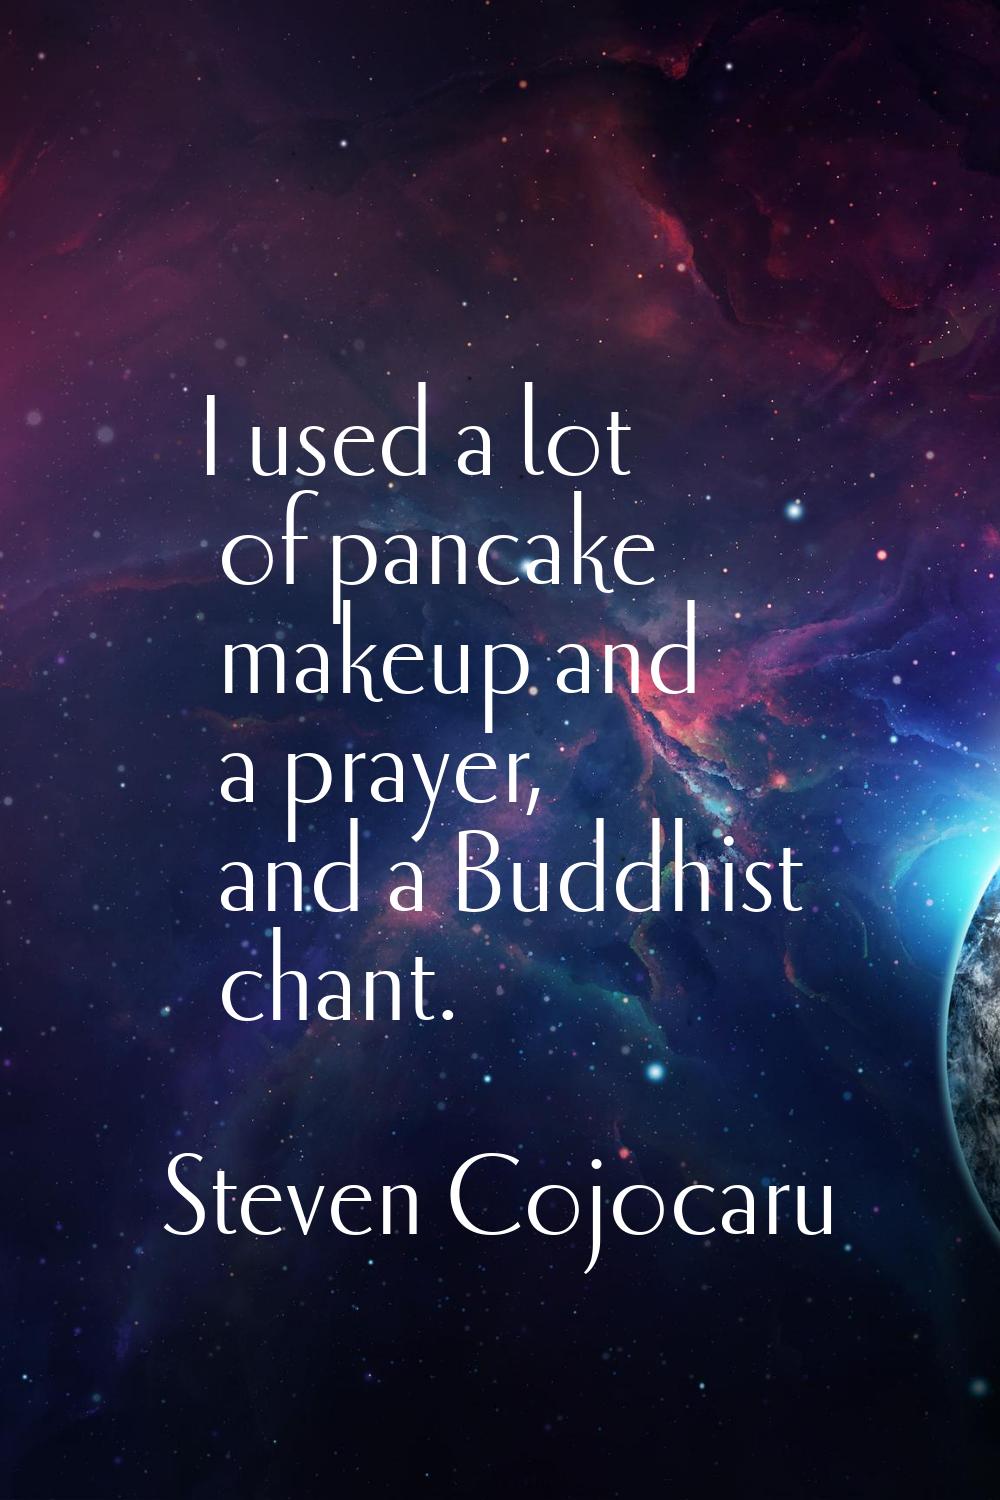 I used a lot of pancake makeup and a prayer, and a Buddhist chant.